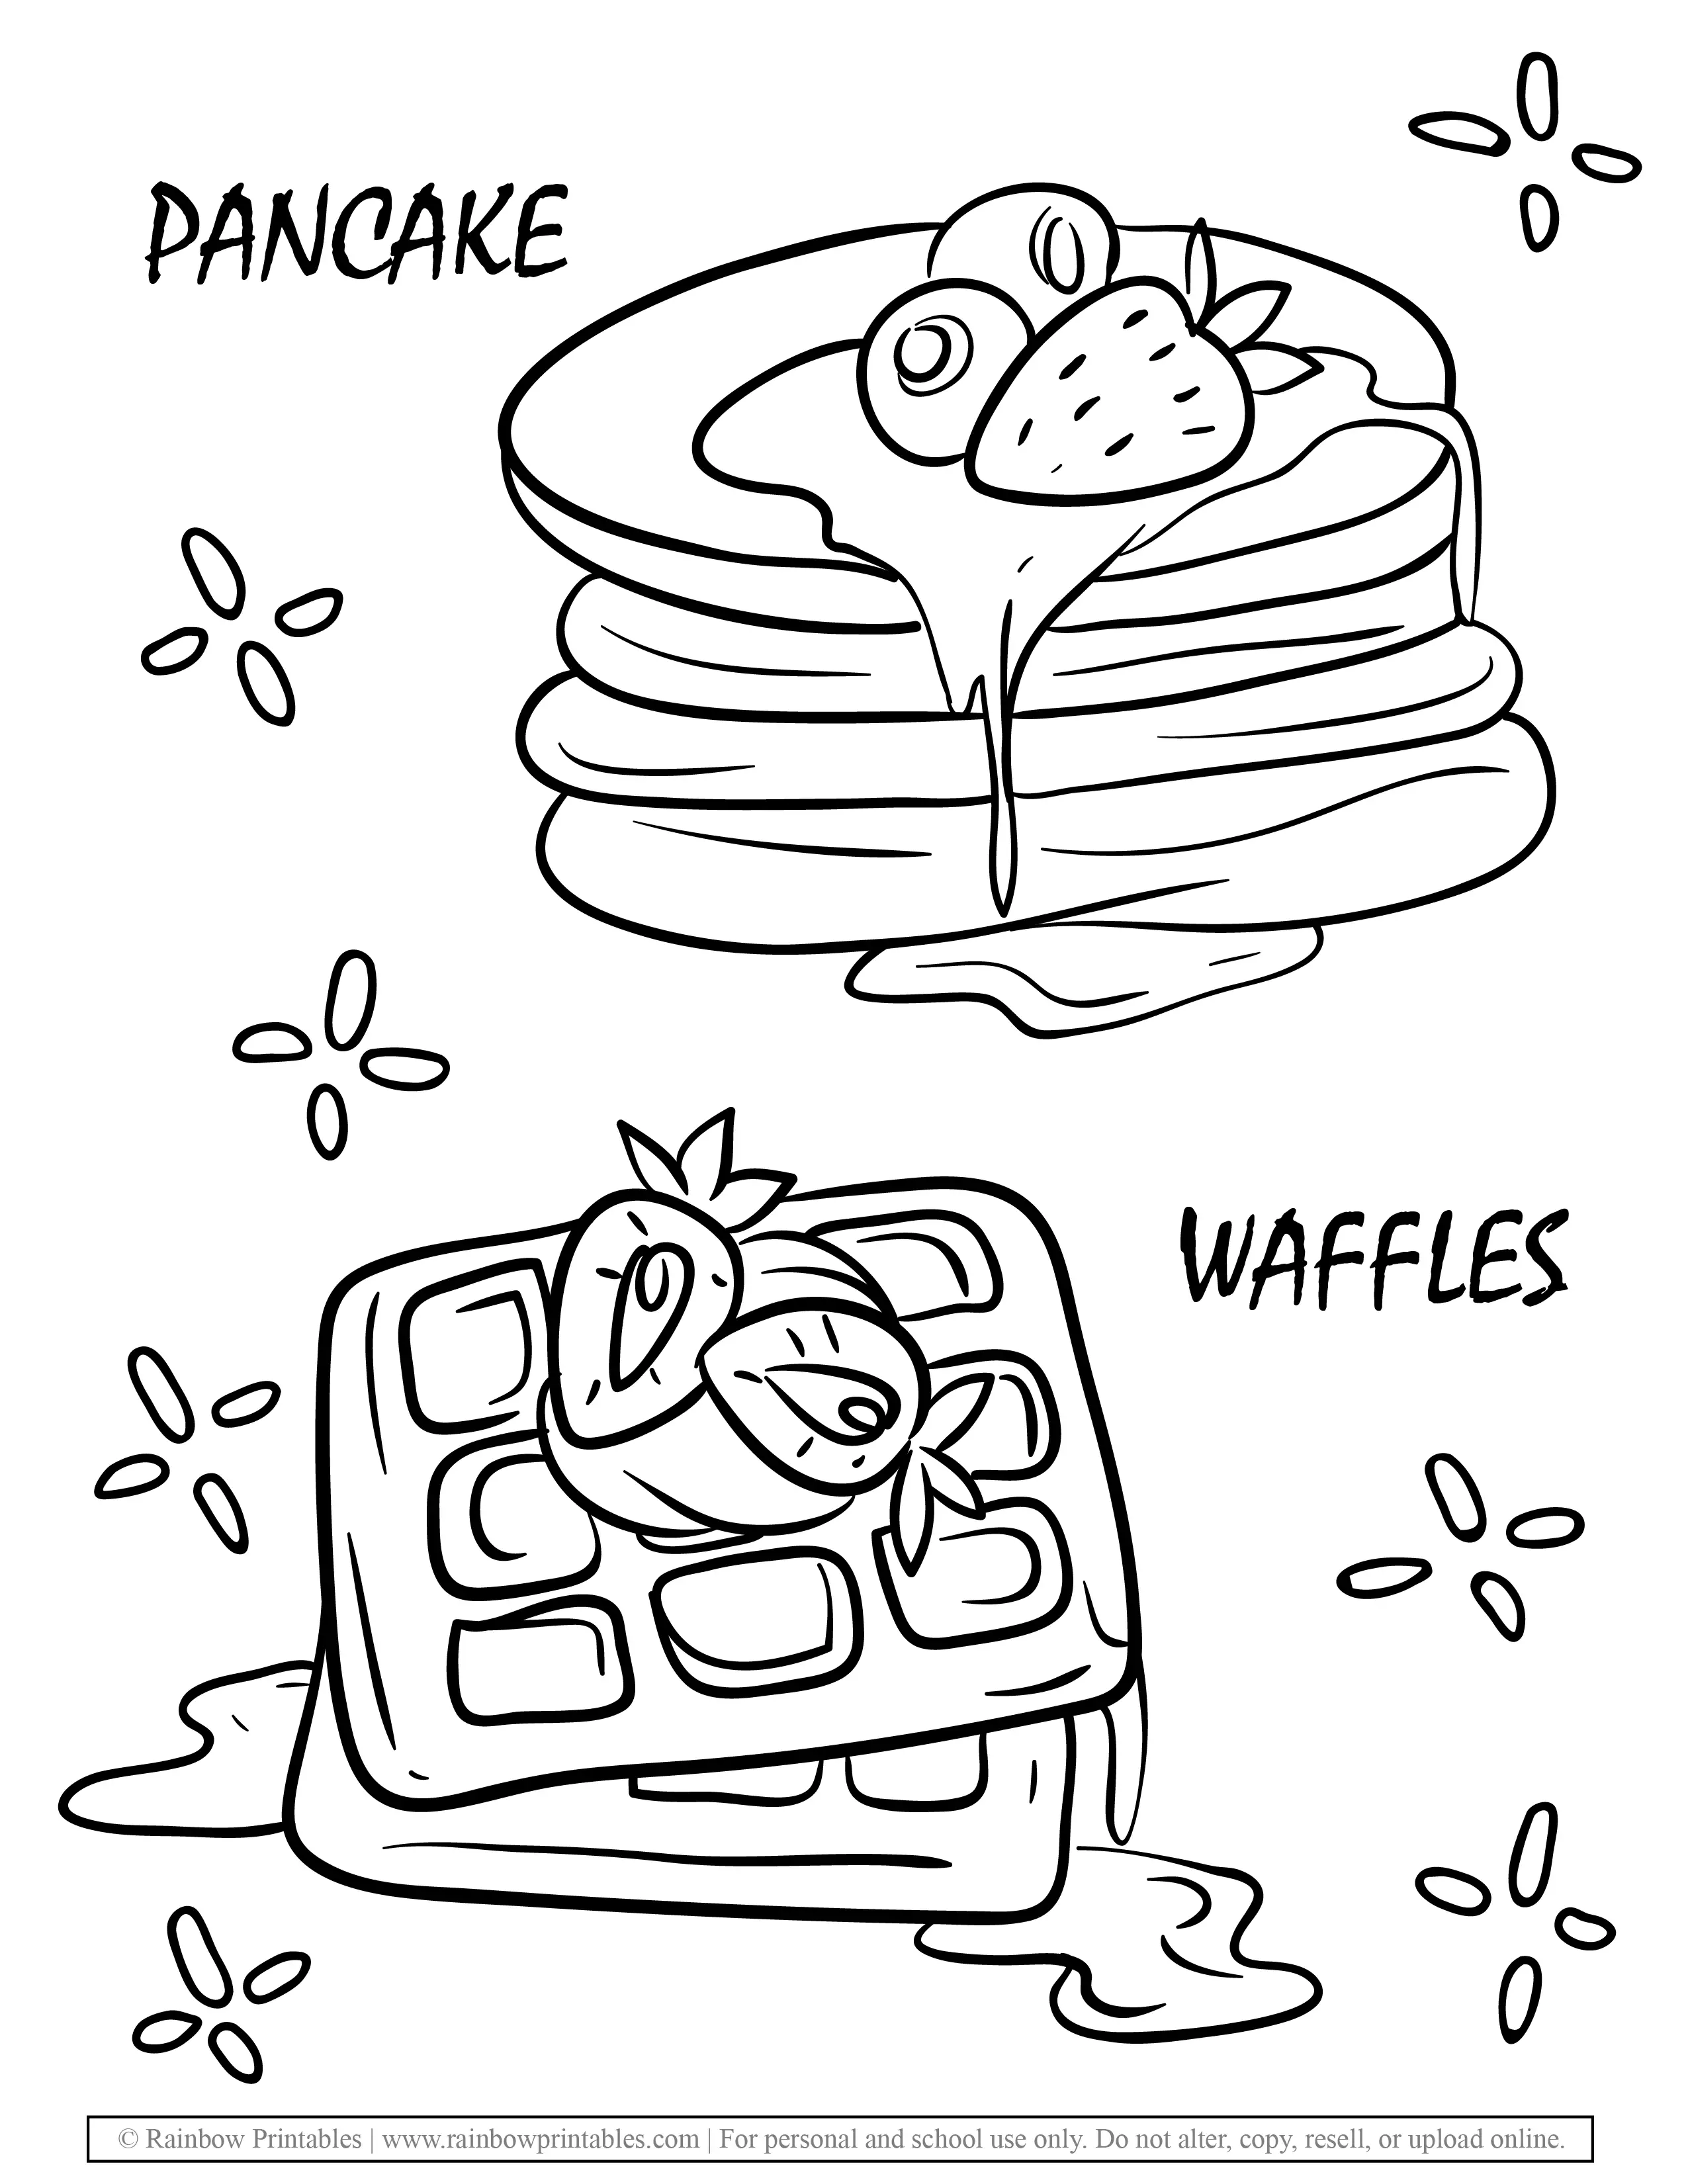 Breakfast Food Dessert Pancake Waffles Coloring Pages for Kids Yummy Foodie